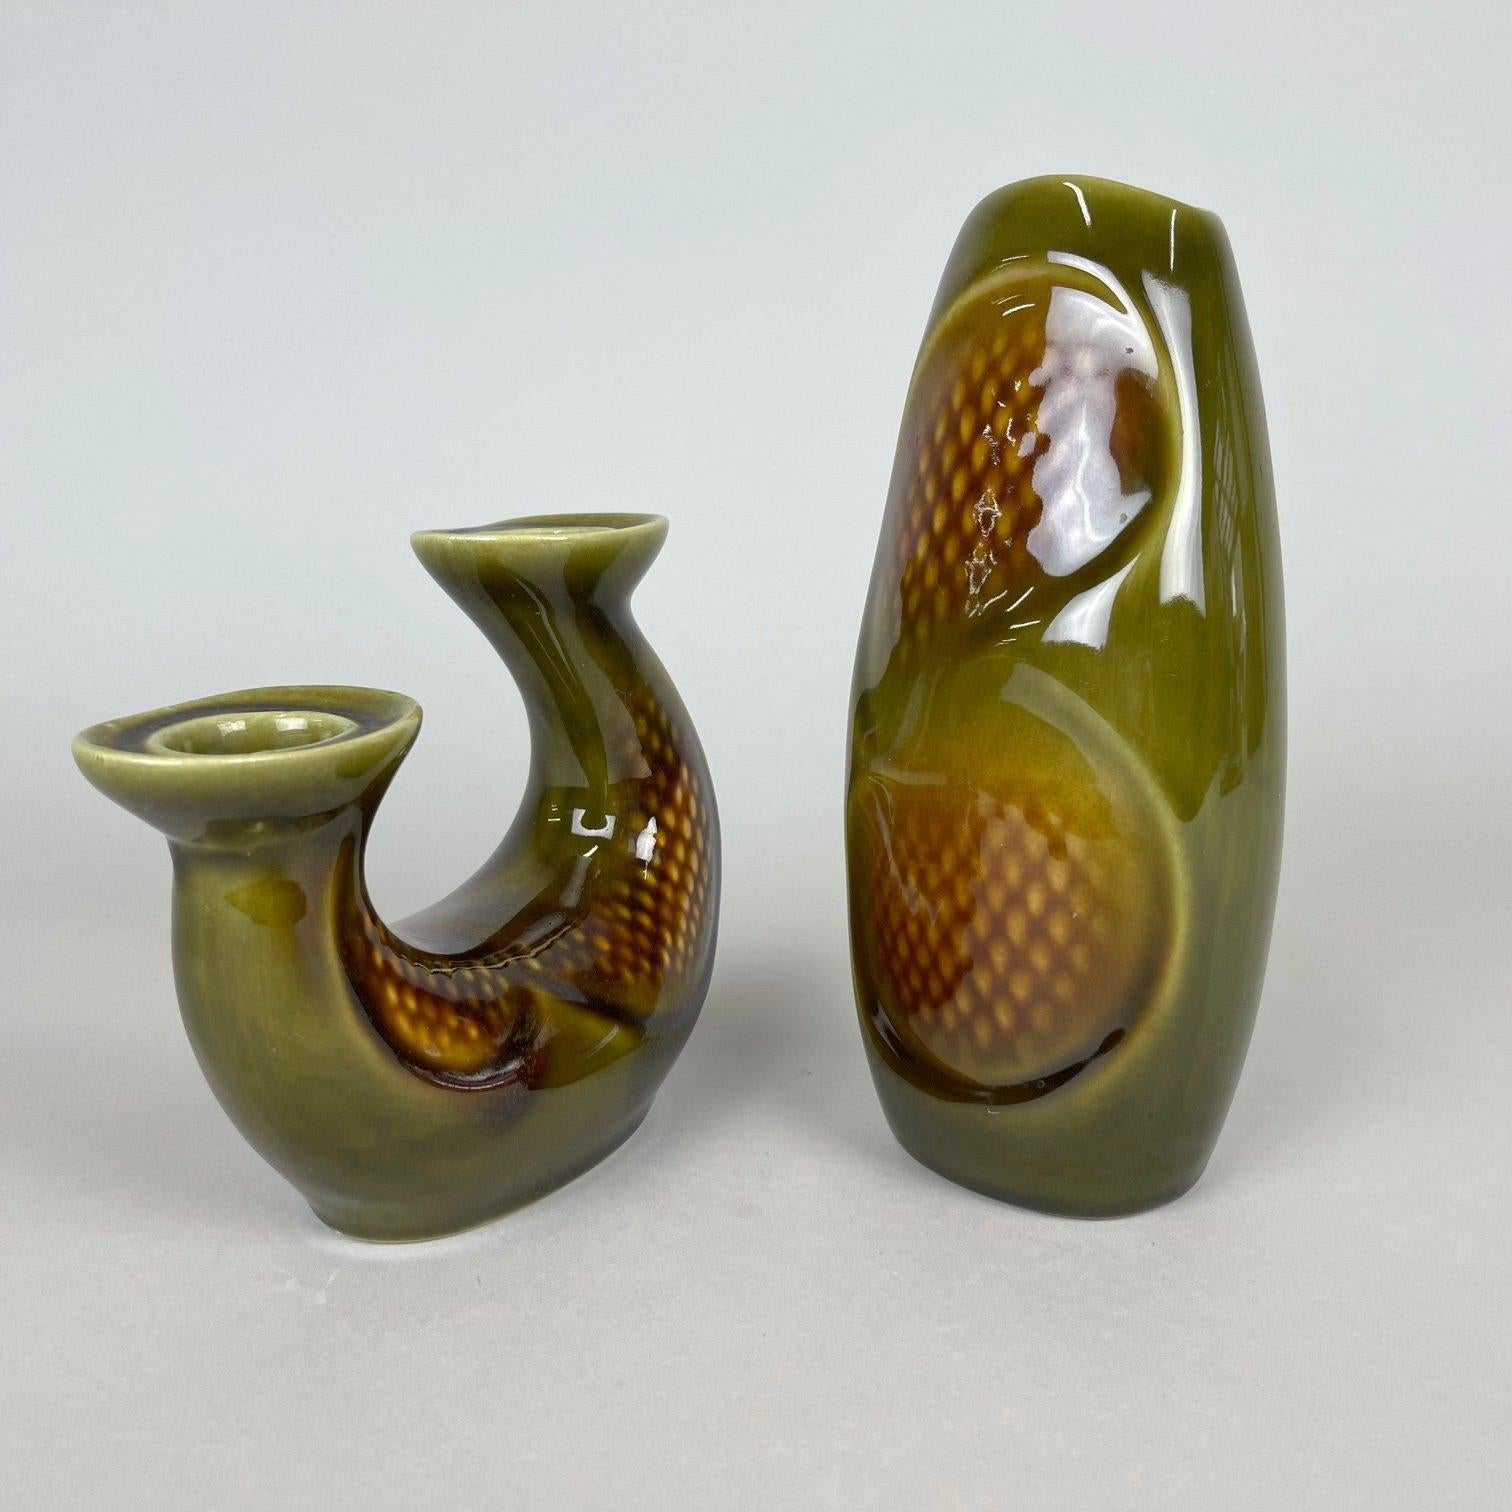 Set of mid century Ditmar Urbach vase and candlestick, made in former Czechoslovakia in the 1960's. In very good condition. 
The vase is approximately 21.5 cm (8.5 inch) high, 10 cm (4 inch) wide and 7 cm (2.76 inch) deep. The candlestick is about